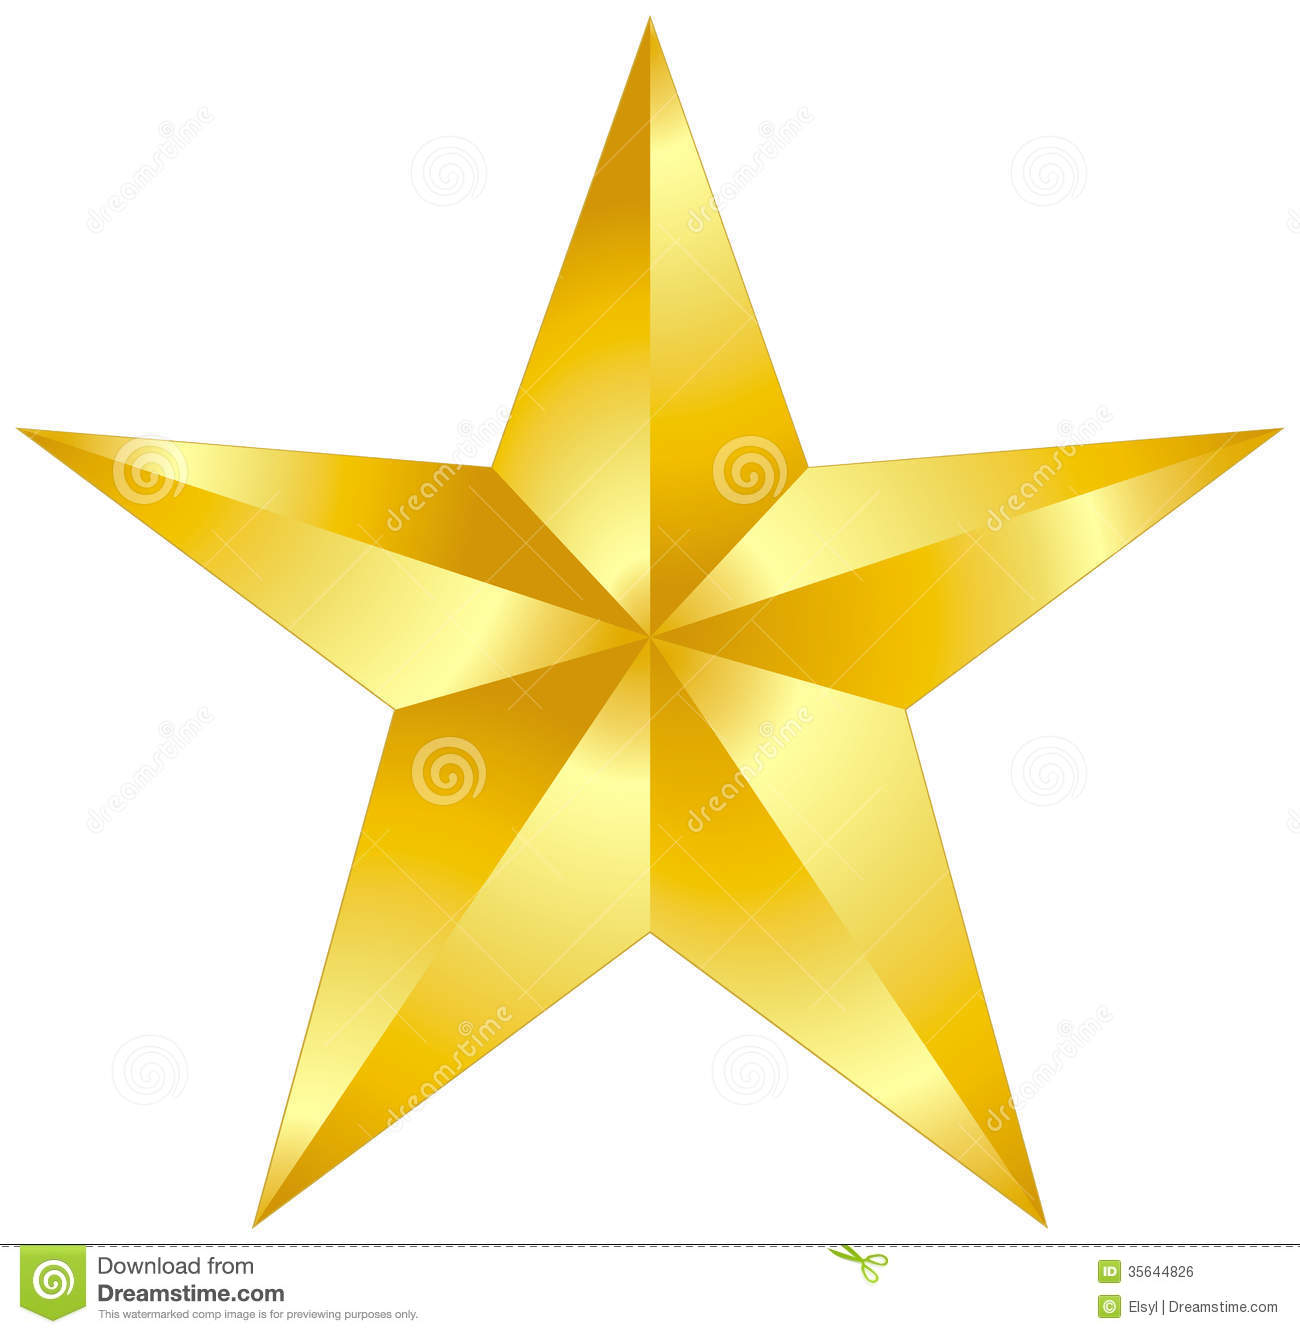 Gold Star Royalty Free Stock Image   Image  35644826